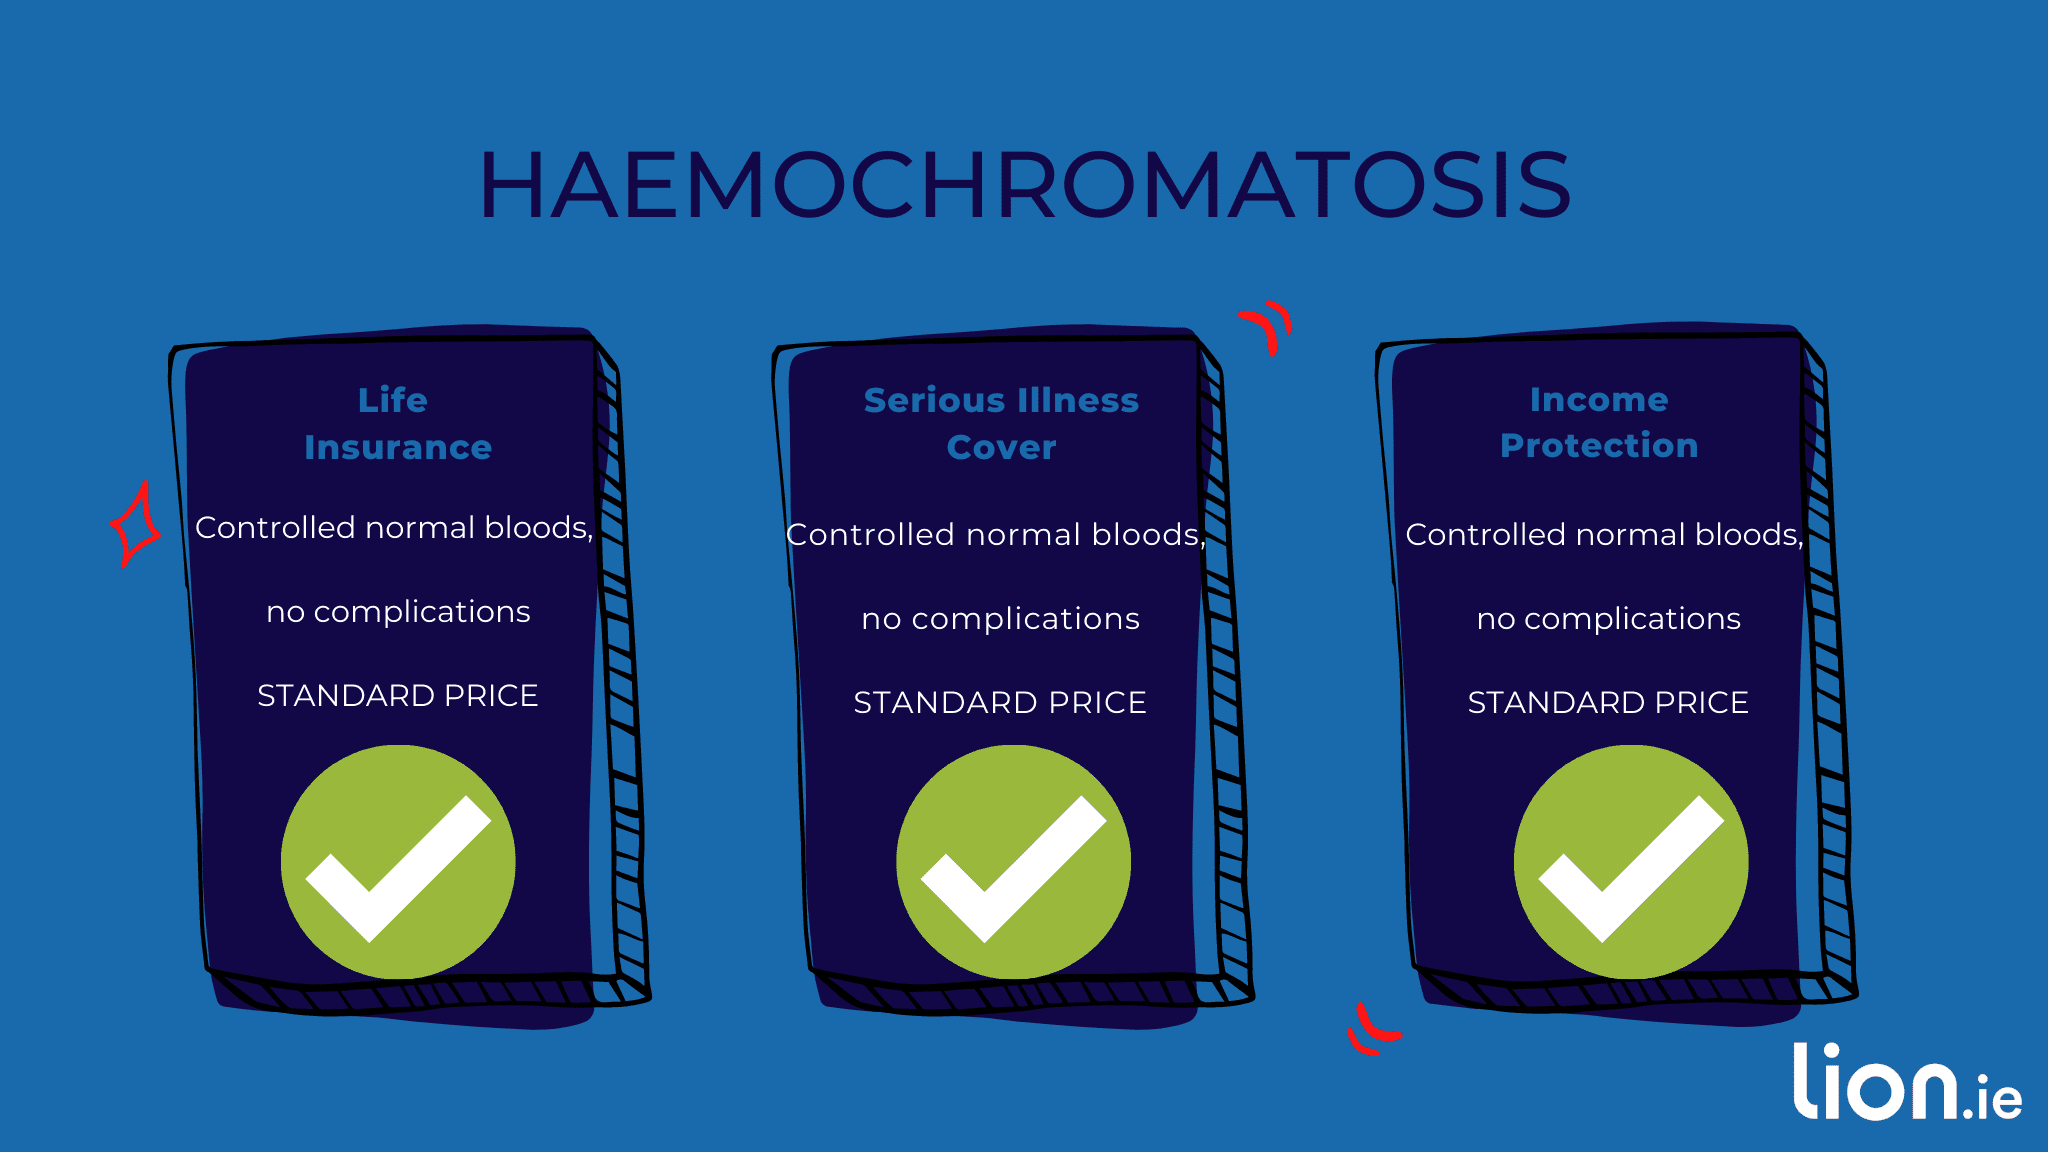 how haemochromatosis affects your premium